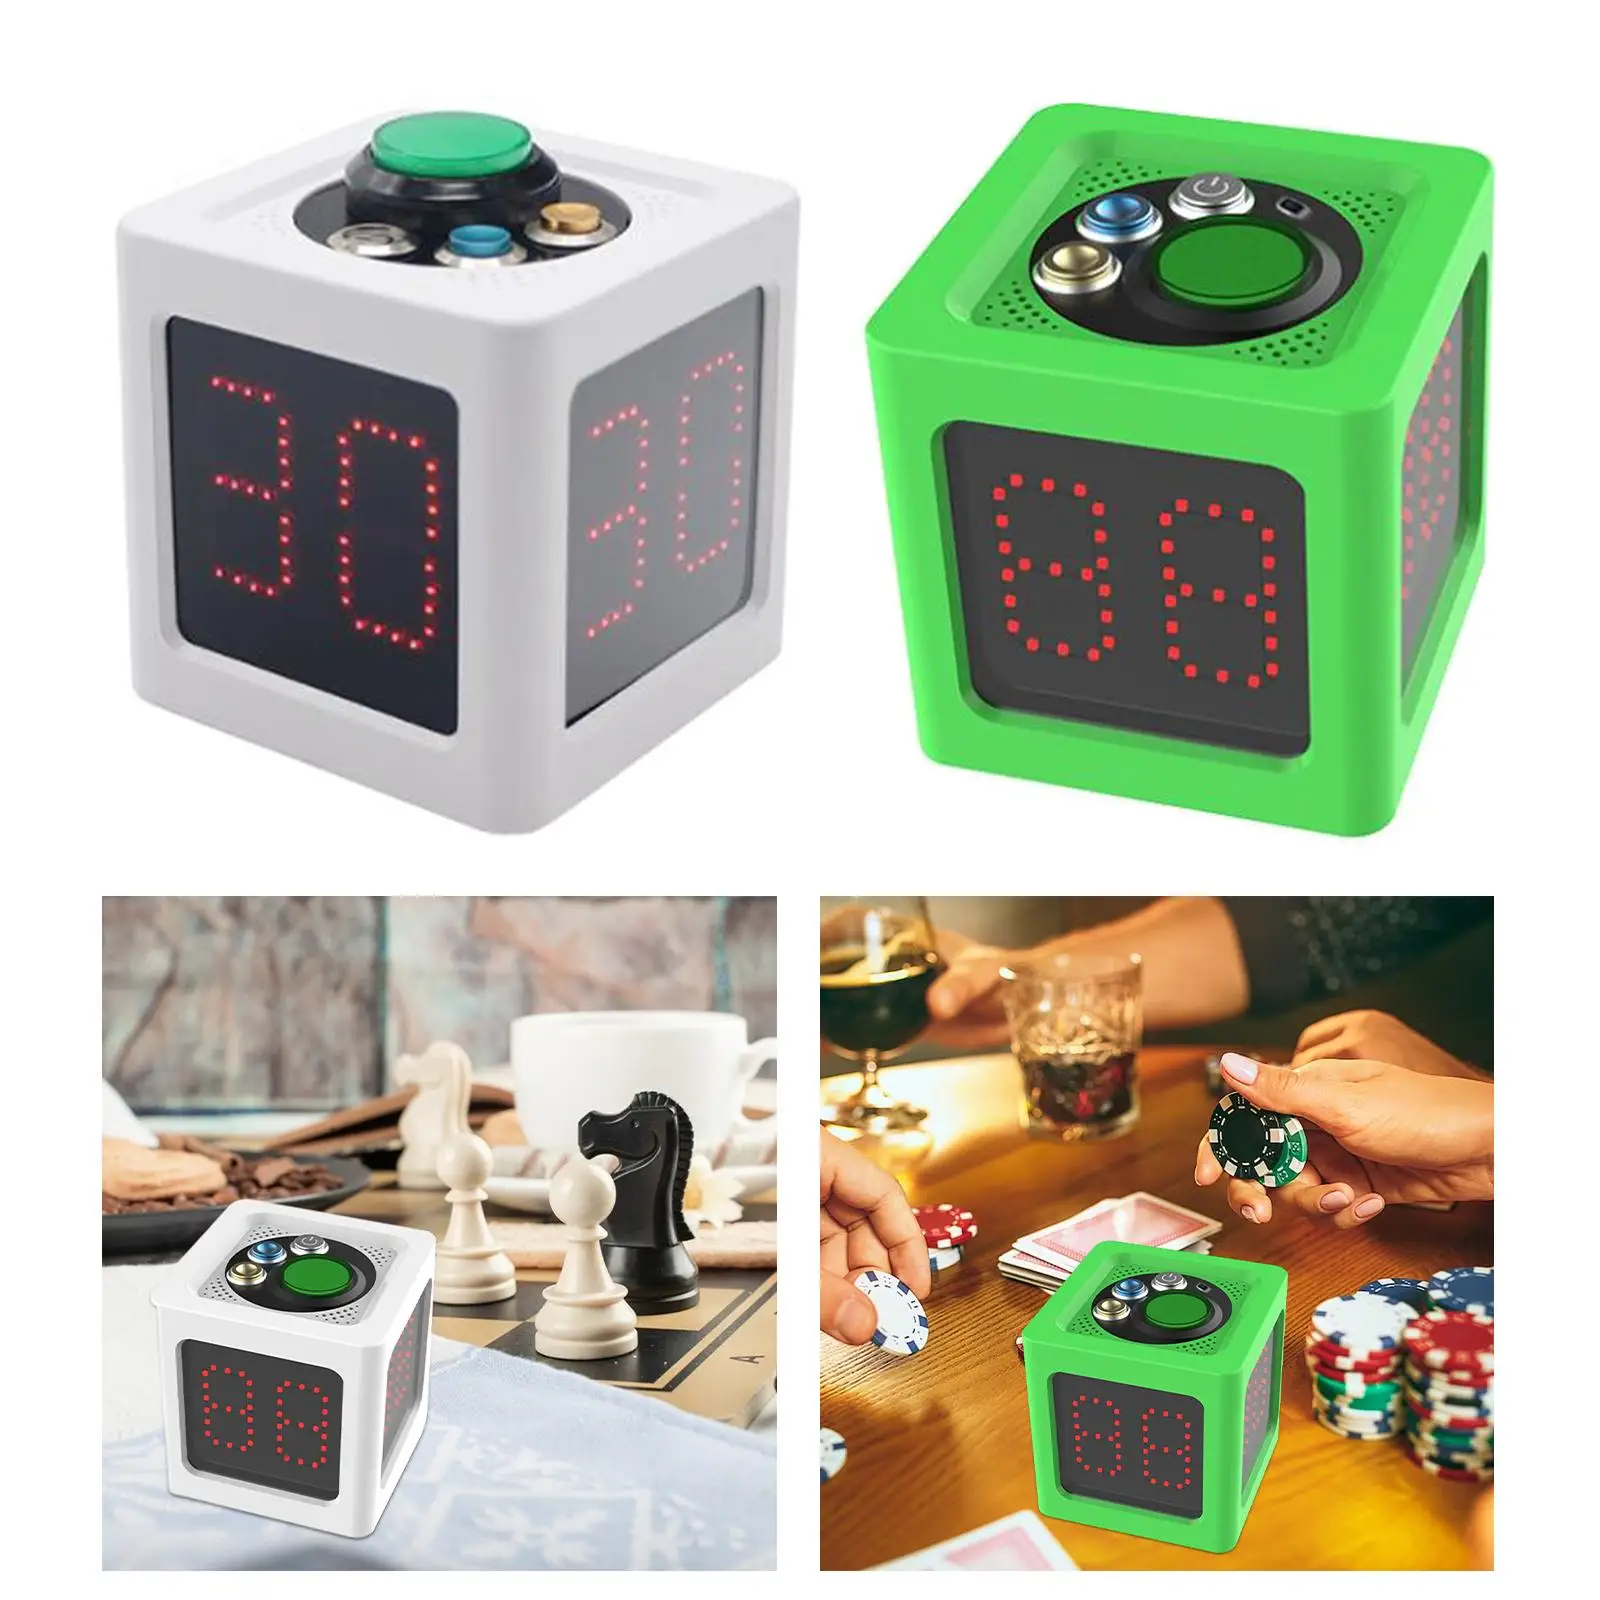 Chess Clock Timer Digital Professional Game Timer Portable Board Games Timer for Tournament Player Sports Mahjong Competition